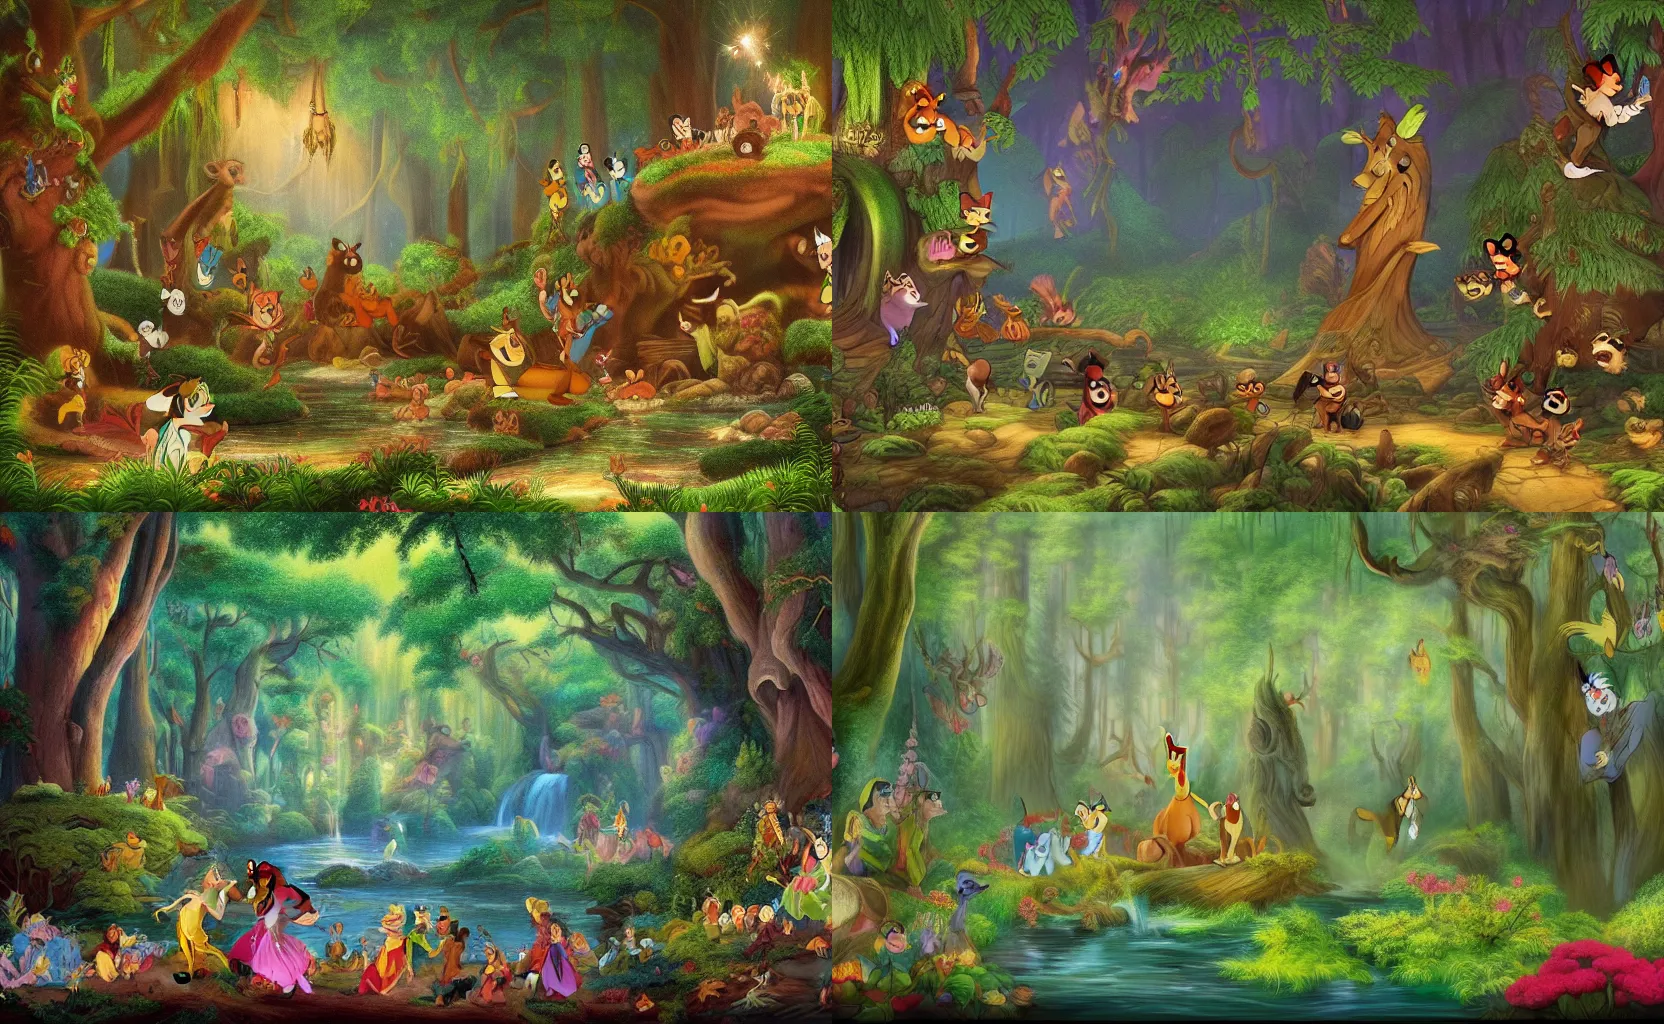 Prompt: Movie frame from the coloured Disney animated motion picture released in 1937, Social media apps forest, beautiful enchanted forest full of critters, directed by Walt Disney, highly detailed background paintings by Thomas Kinkade